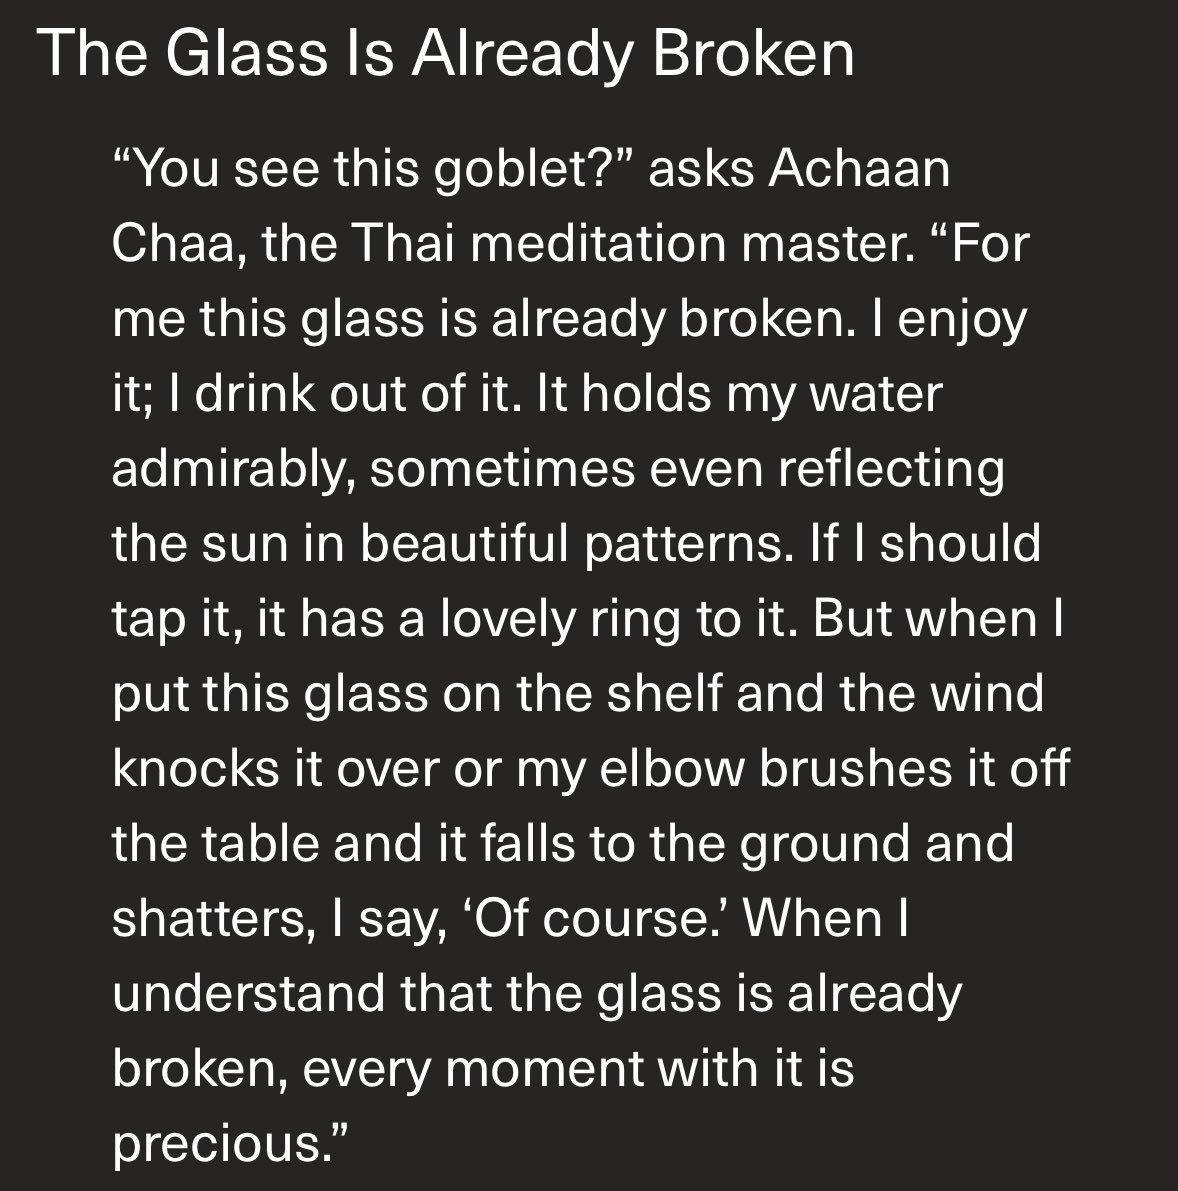 This is one of my favorite quotes ever and taught me how to accept loss and to let go. If you accept that everything is impermanent, then you get to really enjoy every moment you have with it, even when it ends. The glass is already broken